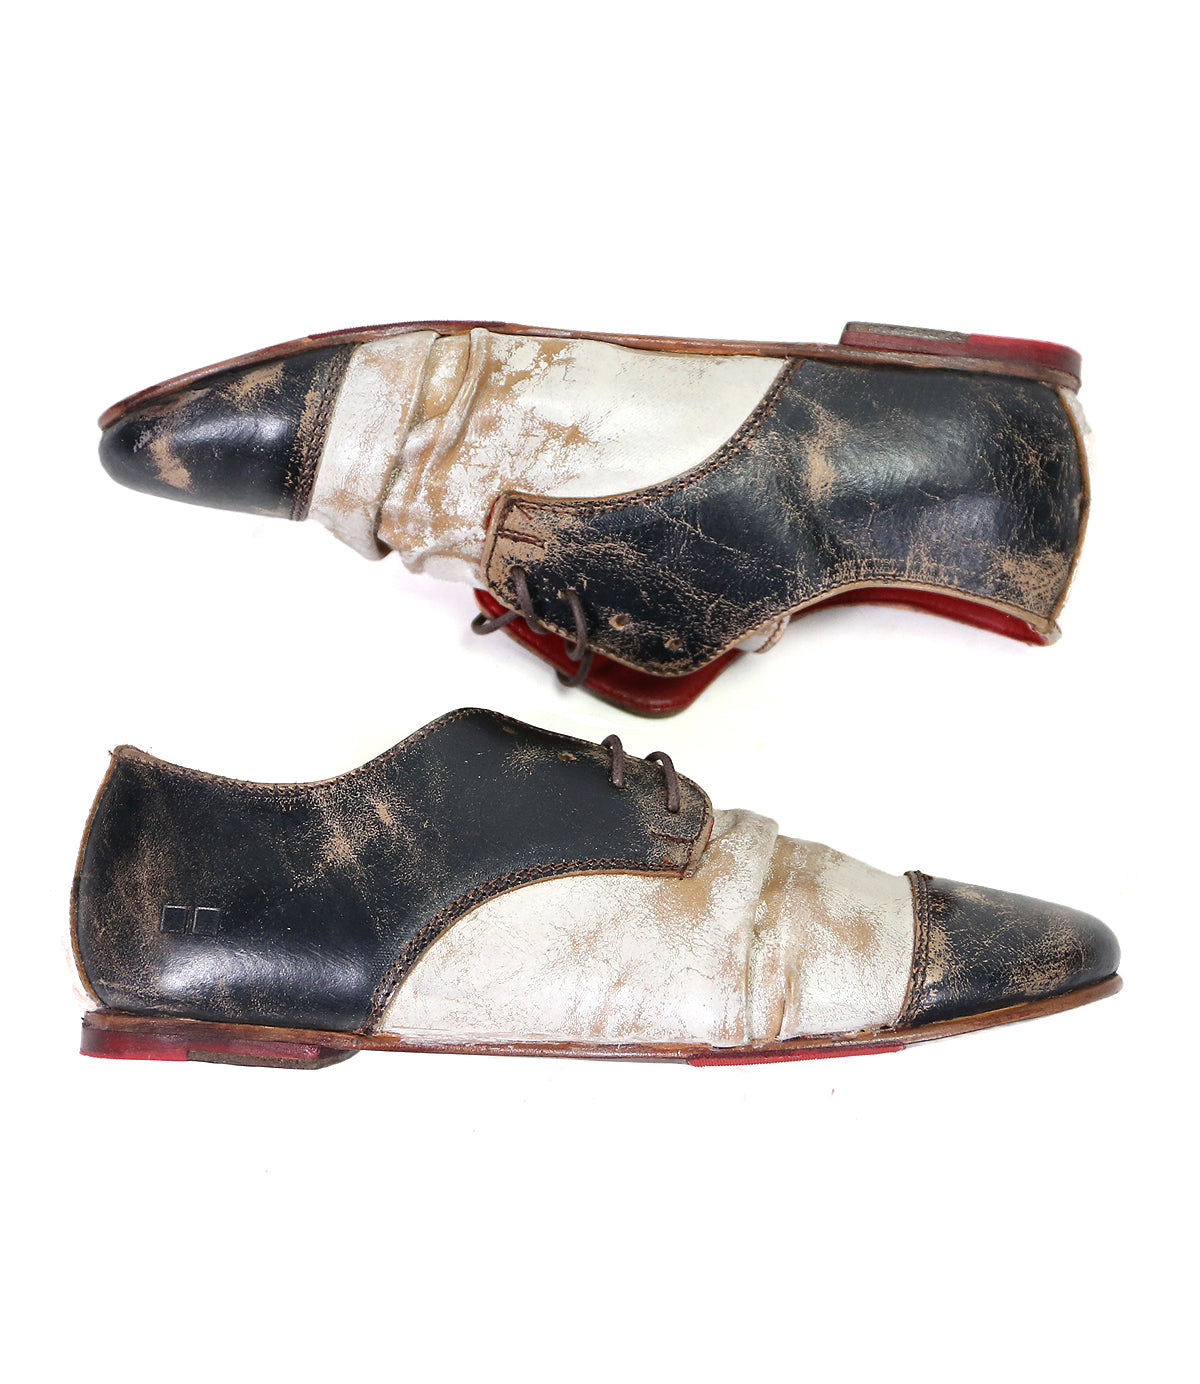 A pair of worn, Bed Stu Rumba II wingtip leather dress shoes with laces on a white background.